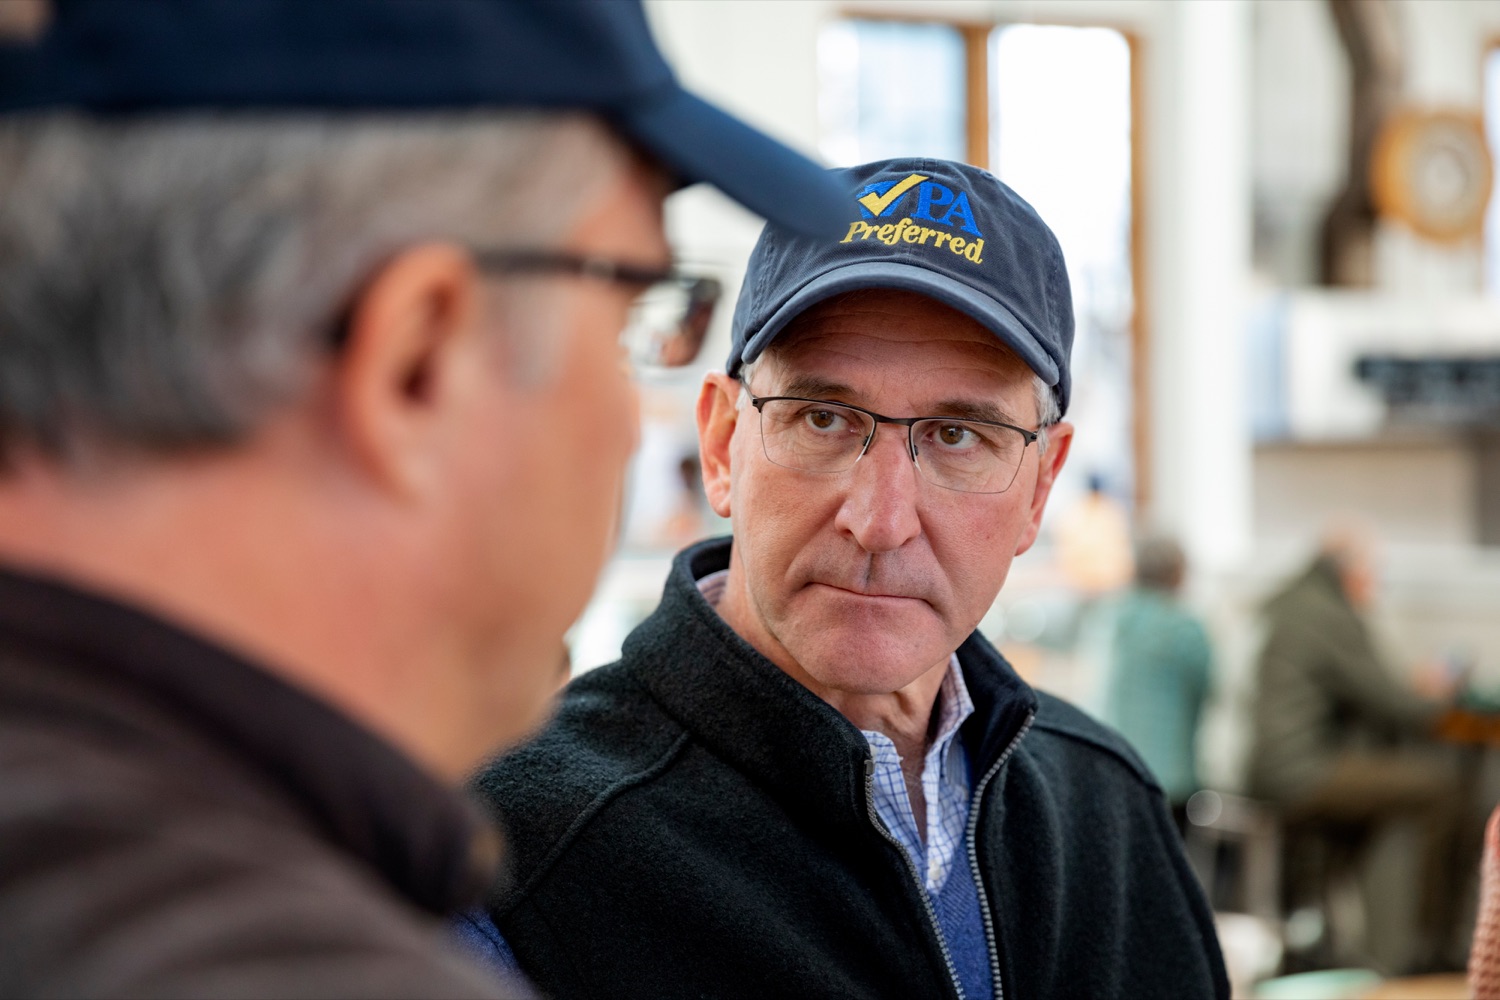 Pennsylvania Department of Agriculture Secretary Russell Redding talks with Mark Zimmerman, owner of Revittle Market, while grocery shopping for Thanksgiving dinner inside Broad Street Market on Thursday, November 21, 2019.<br><a href="https://filesource.amperwave.net/commonwealthofpa/photo/17546_AGRIC_Buy_Local_NK_010.JPG" target="_blank">⇣ Download Photo</a>